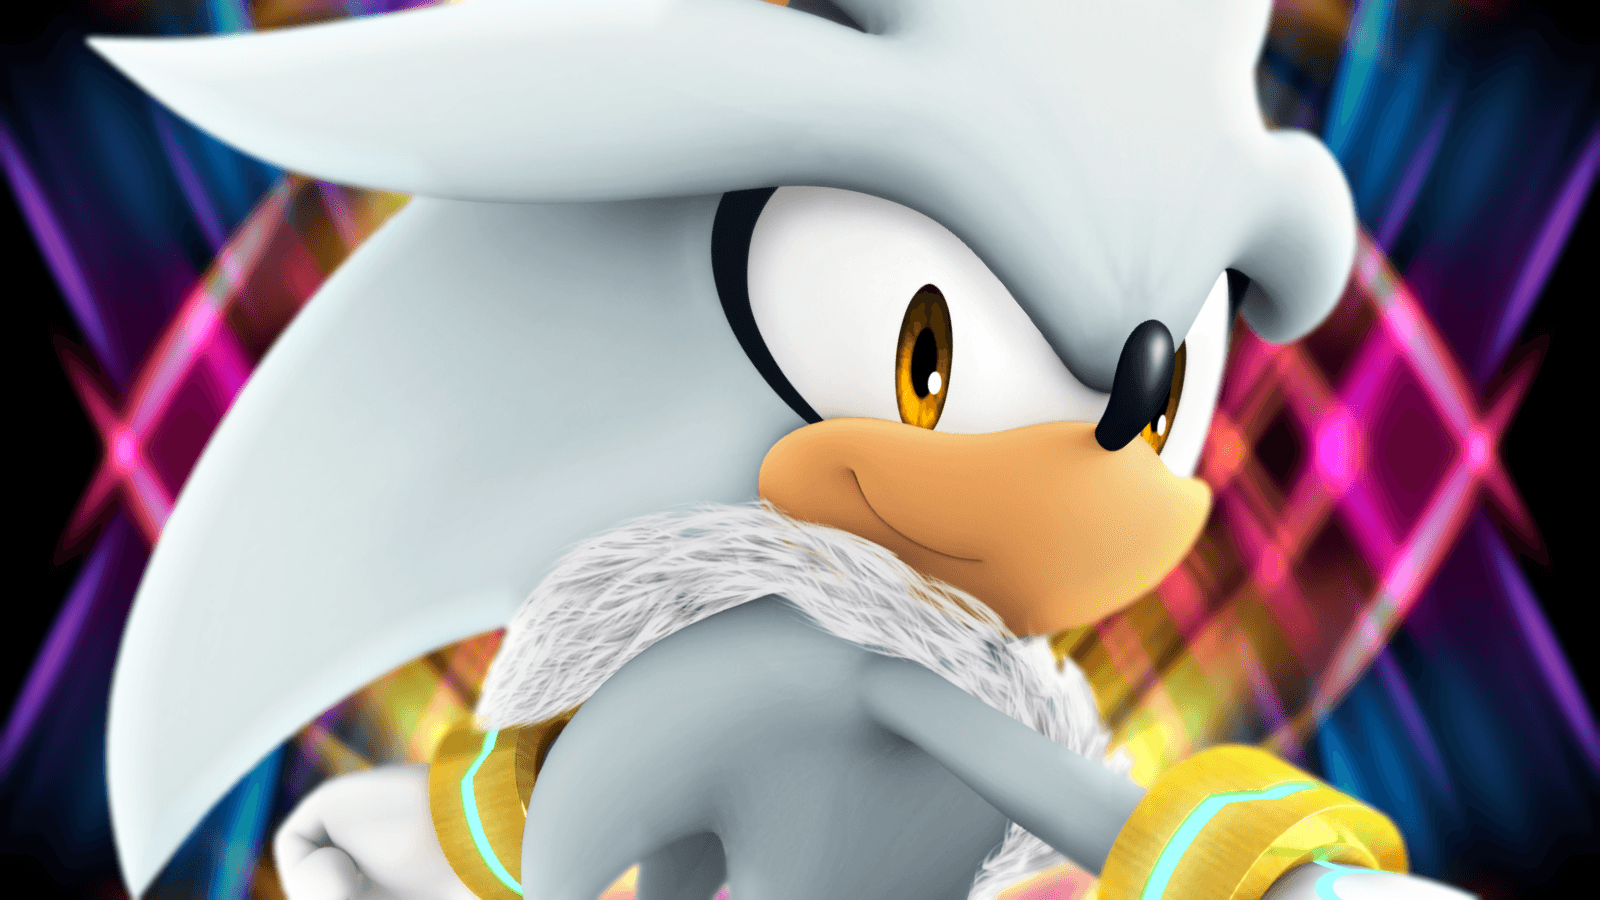 Silver The Hedgehog By Light Rock